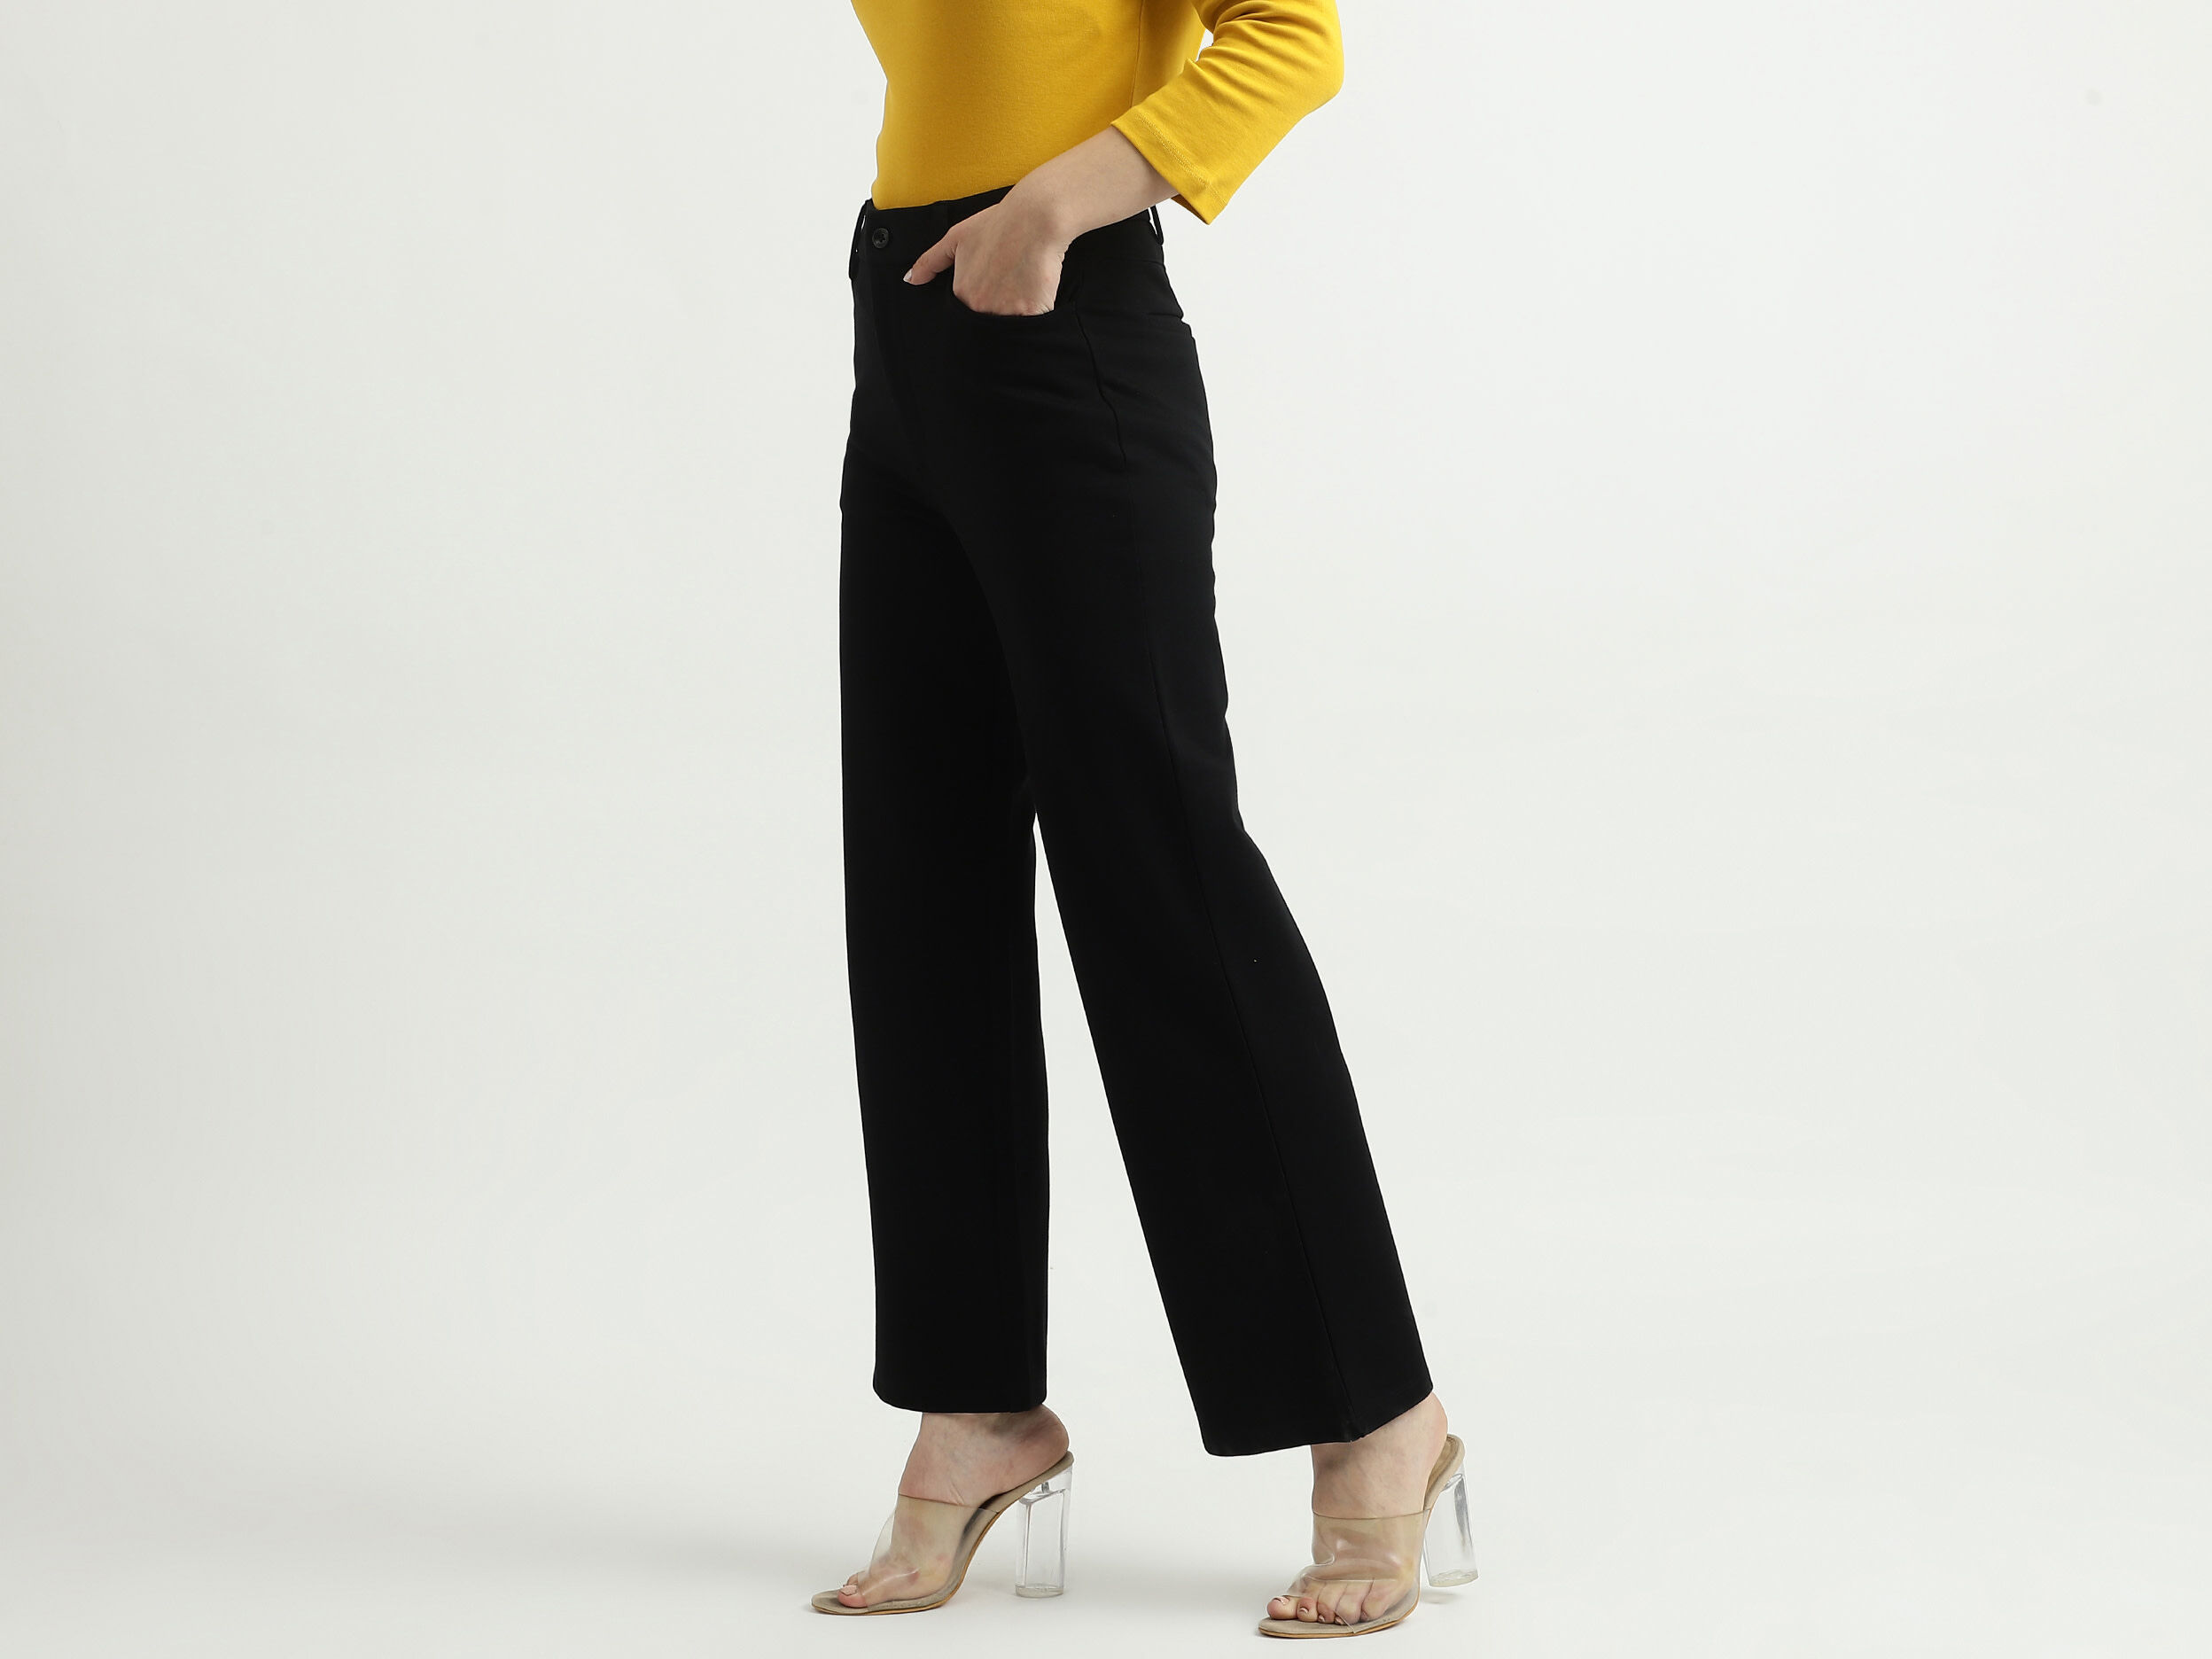 Buy Black Trousers  Pants for Women by UNITED COLORS OF BENETTON Online   Ajiocom